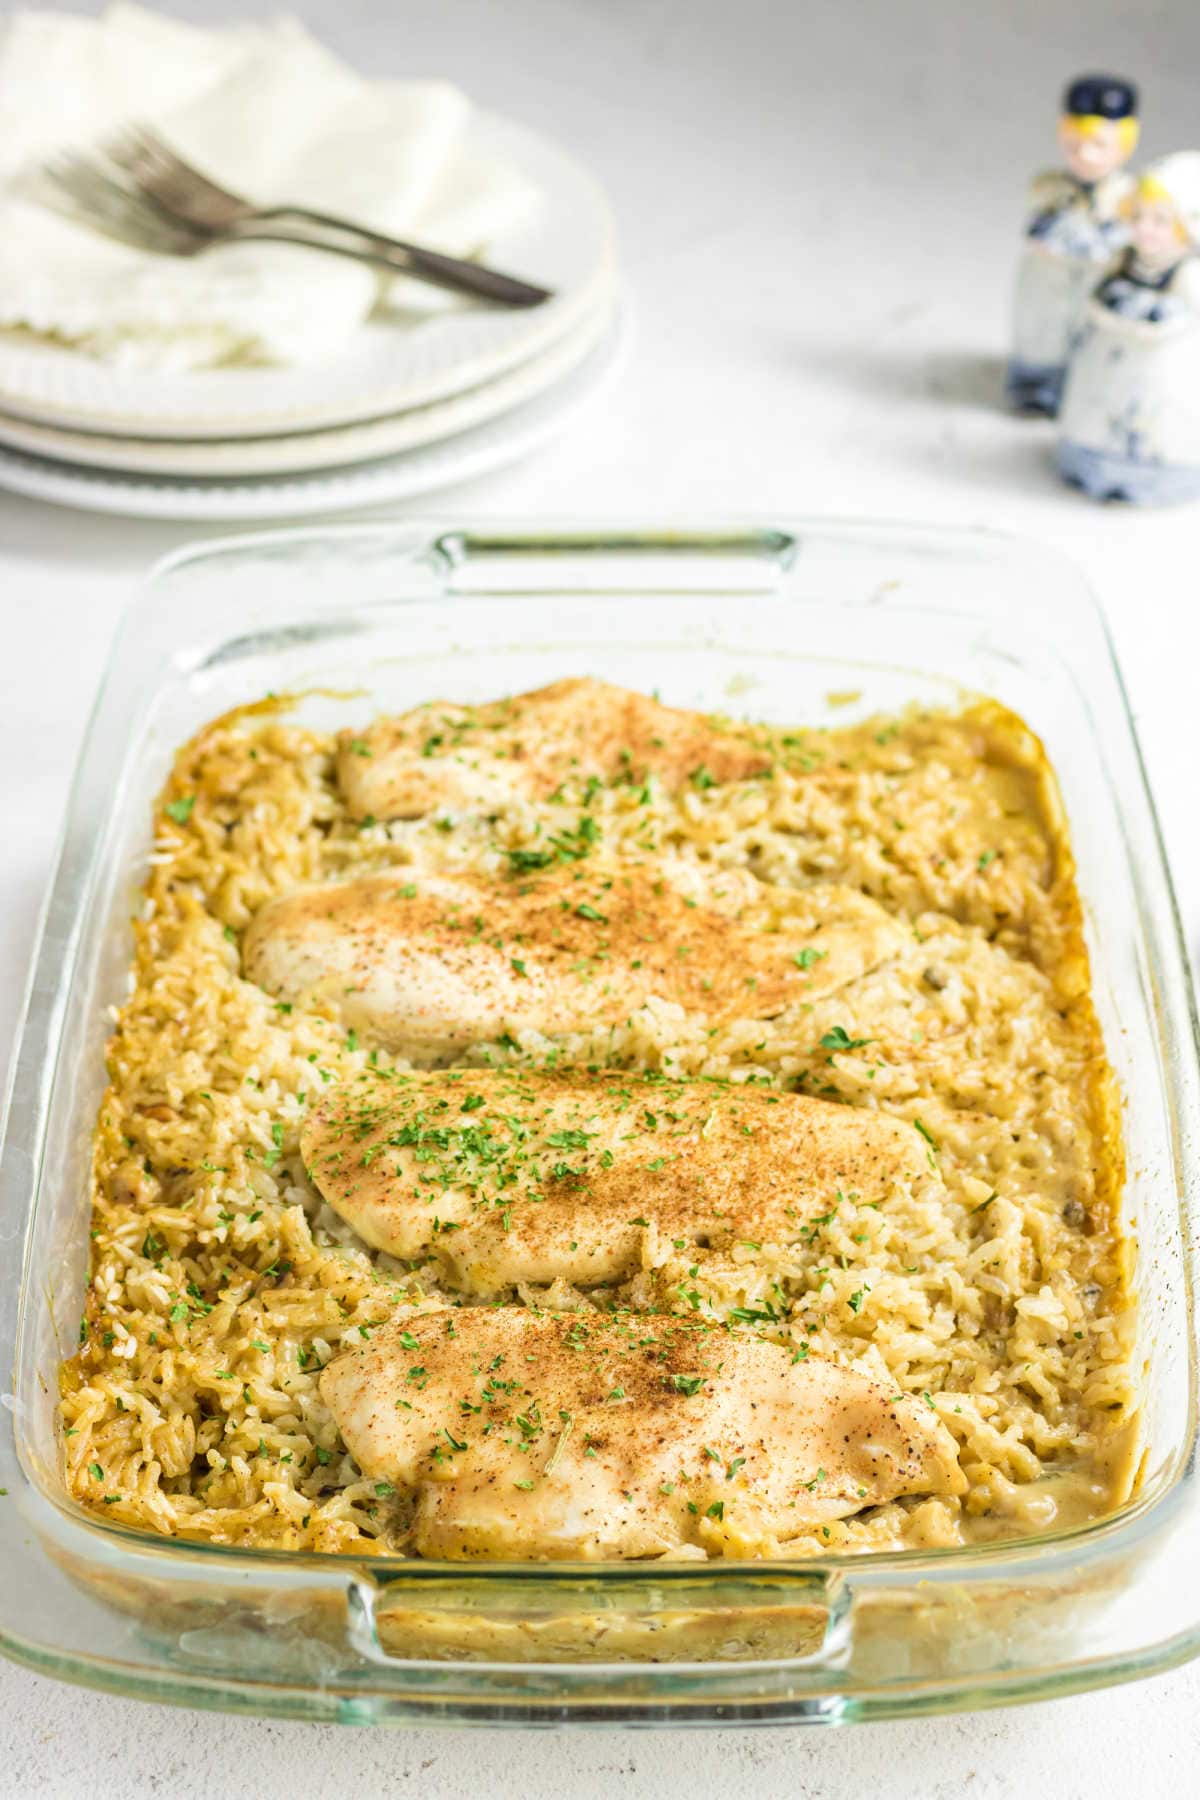 Full casserole dish of chicken and rice.